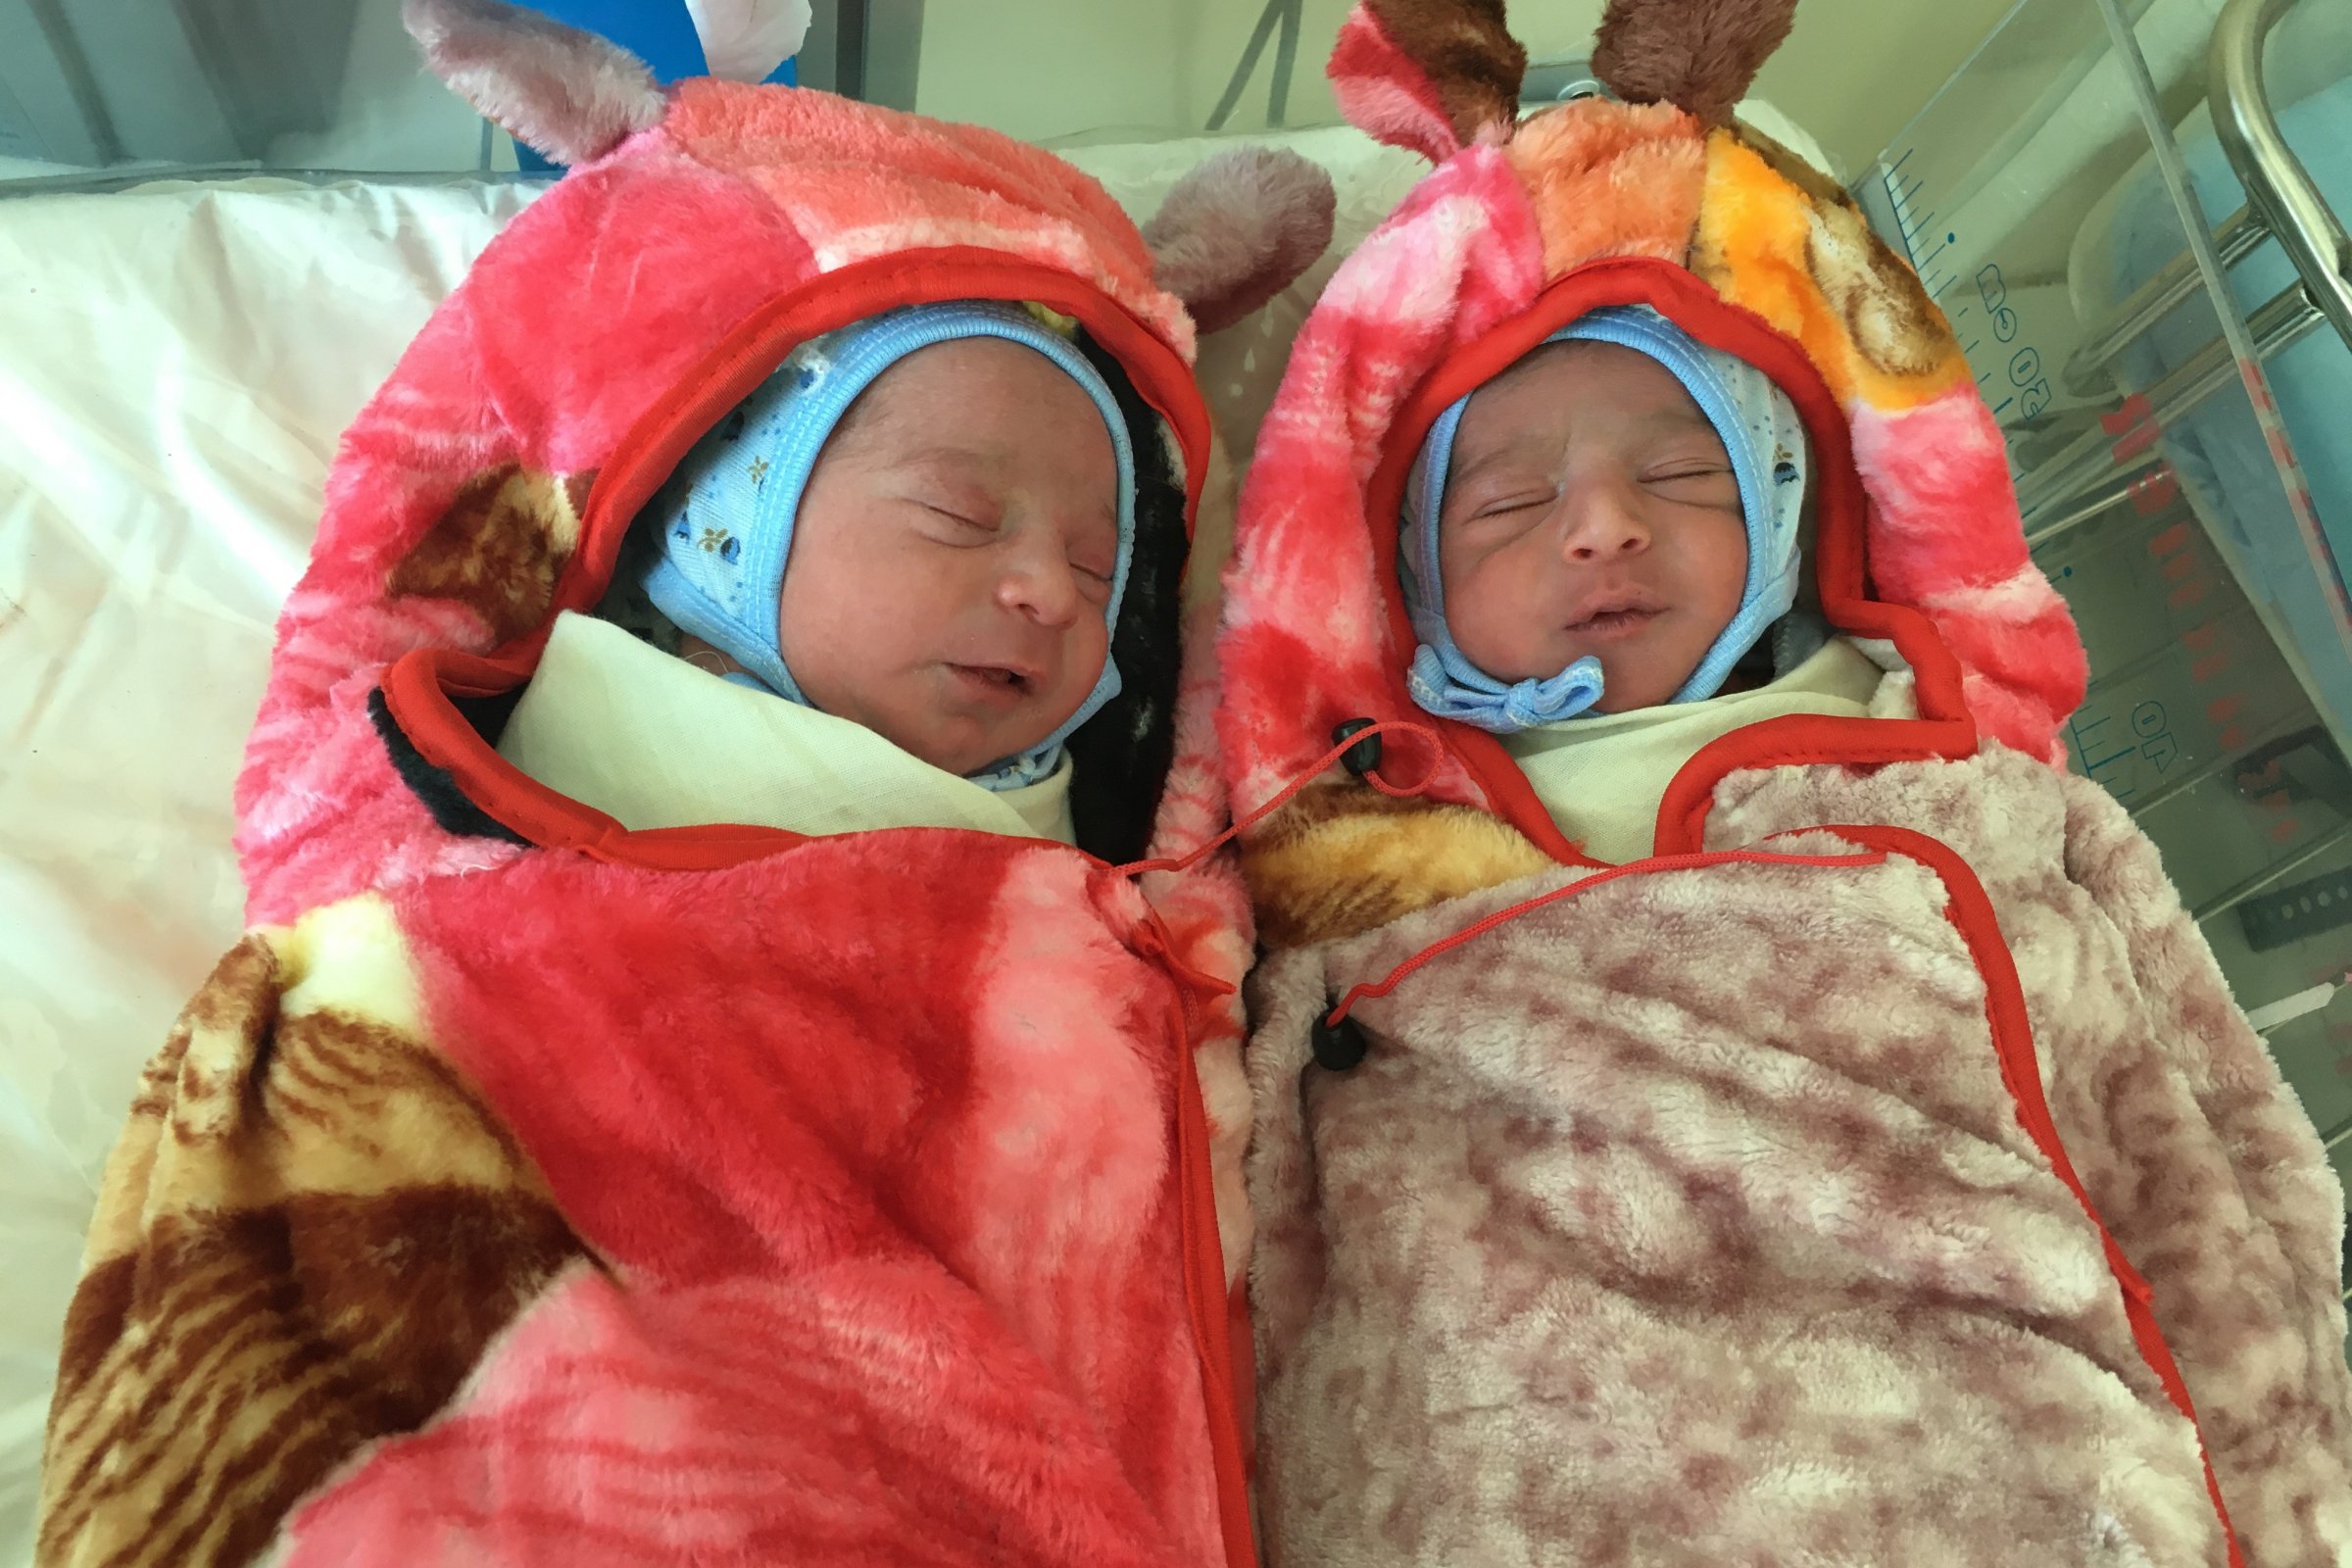 Twins born on New Year's Day at an MSF hospital in Houban, Yemen